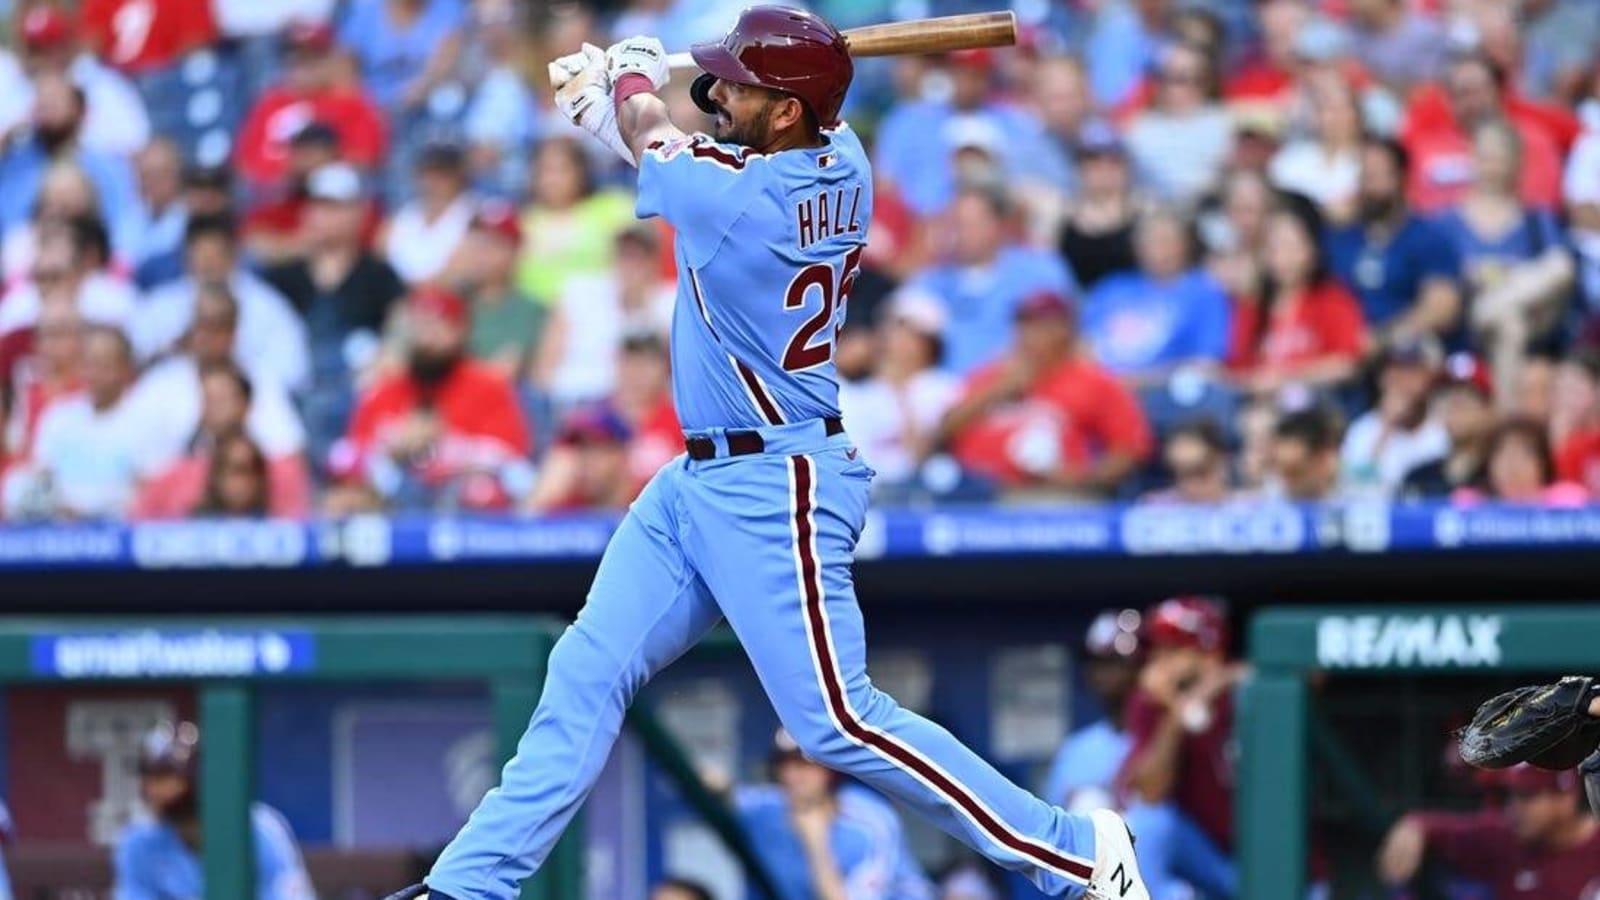 After a four-run first, Phillies HOLD ON to beat the Cardinals, 5-3